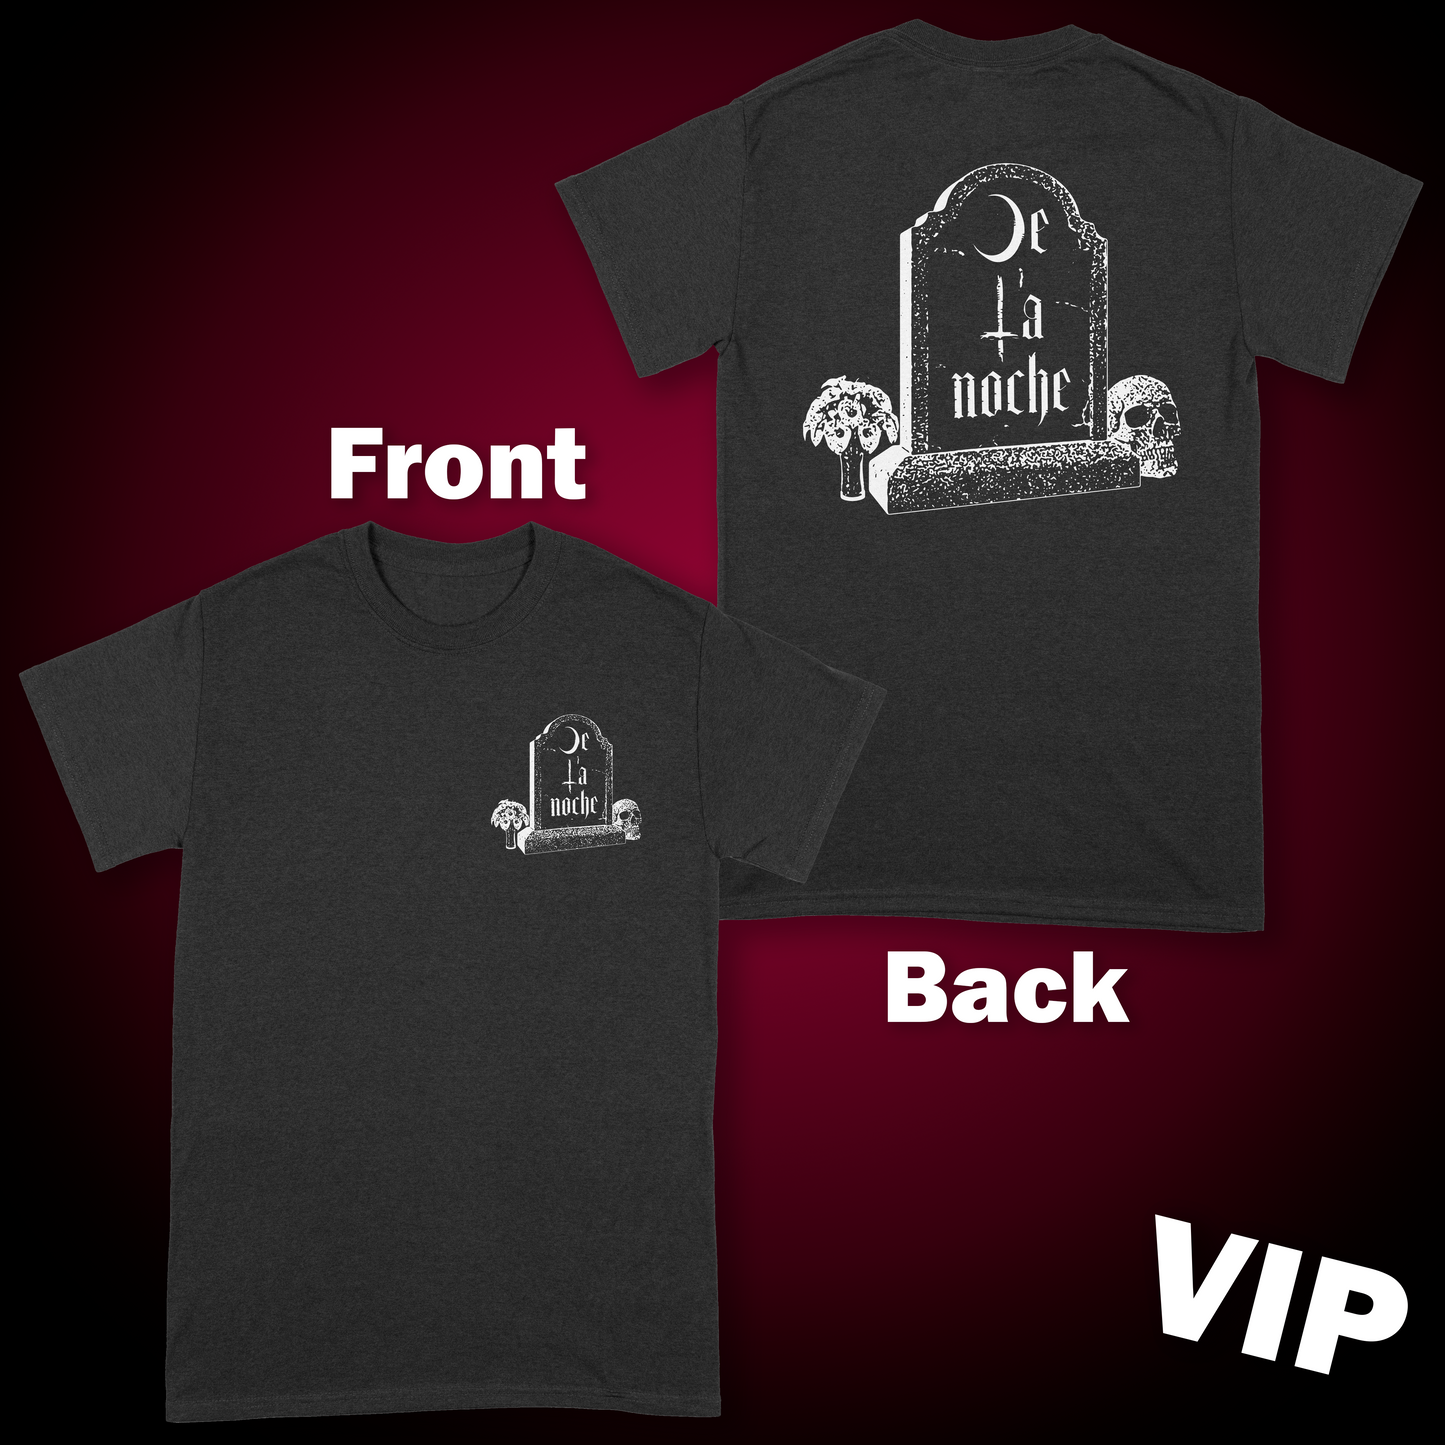 VIP Ticket & T-Shirt Preorder (Limited to 40)